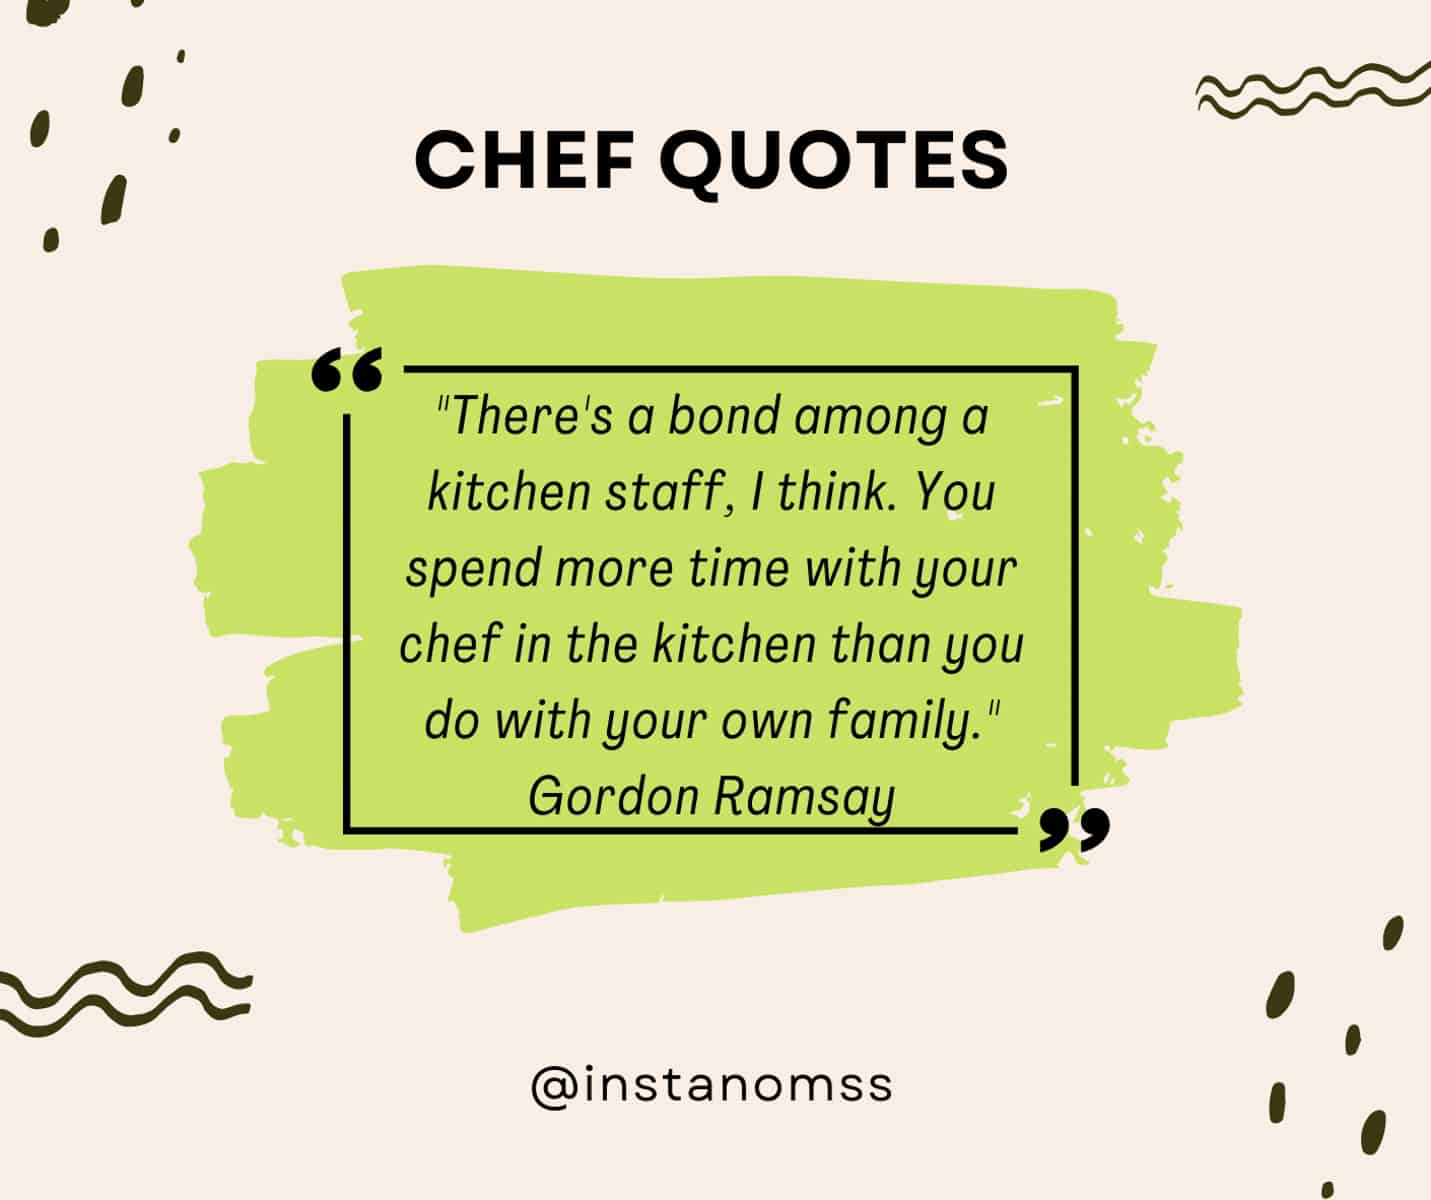 "There's a bond among a kitchen staff, I think. You spend more time with your chef in the kitchen than you do with your own family." Gordon Ramsay